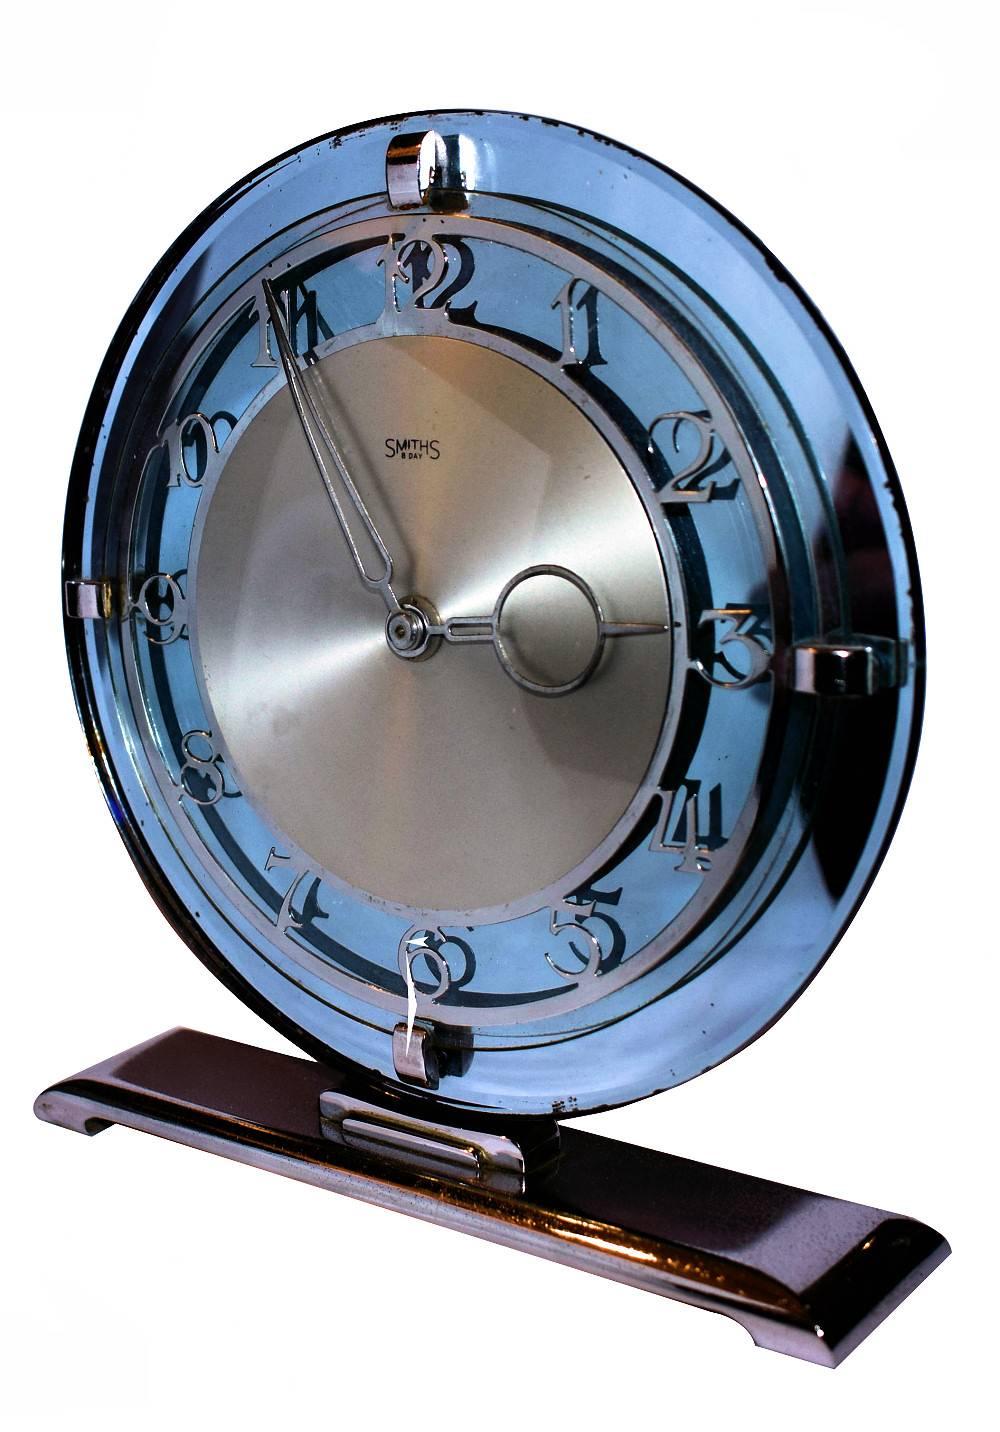 Very attractive 1930s Art Deco Modernist clock. Mechanical movement and keeps very good time. Features a lovely blue tinted mirrored dial face with gilt numerals and hands all of which is supported on a resting chrome plinth. Condition is way above